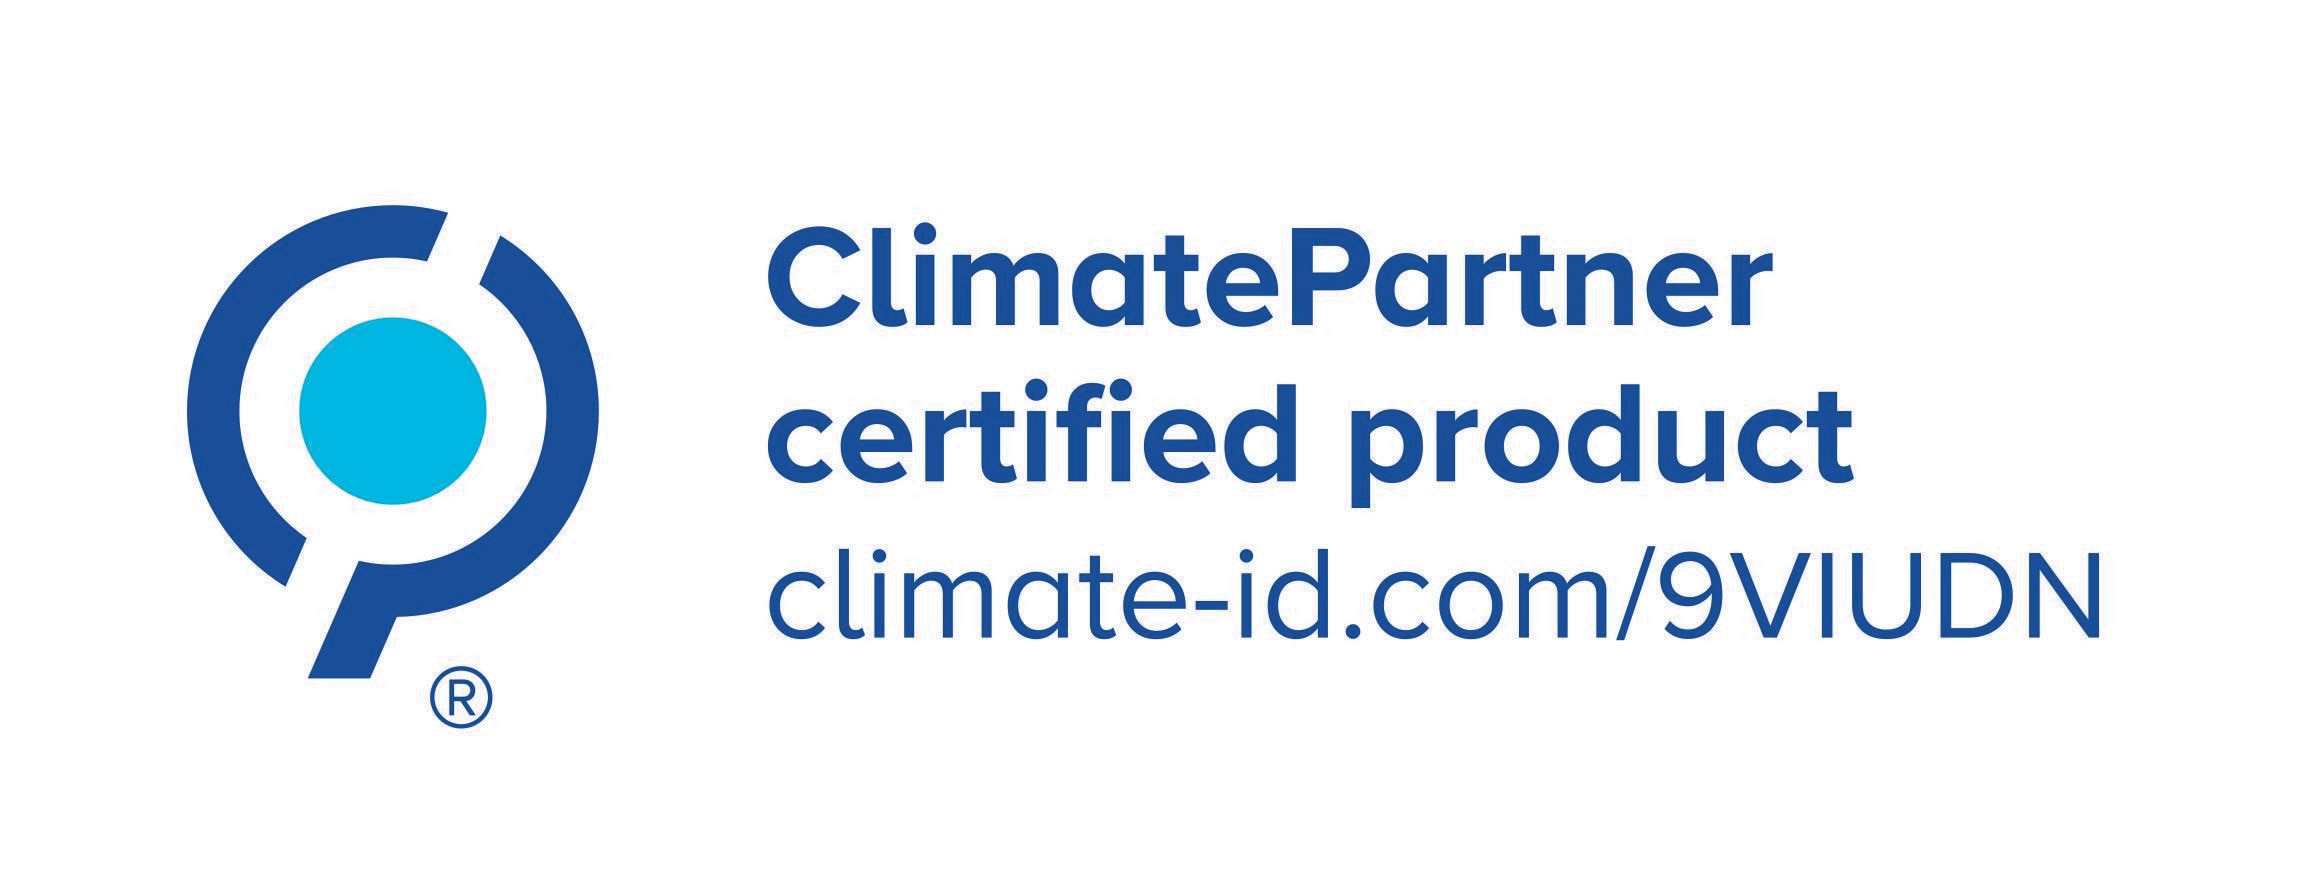 Carbon neutral – produced with purchased certified renewable electricity and remaining carbon emissions are offset with credits from climate projects